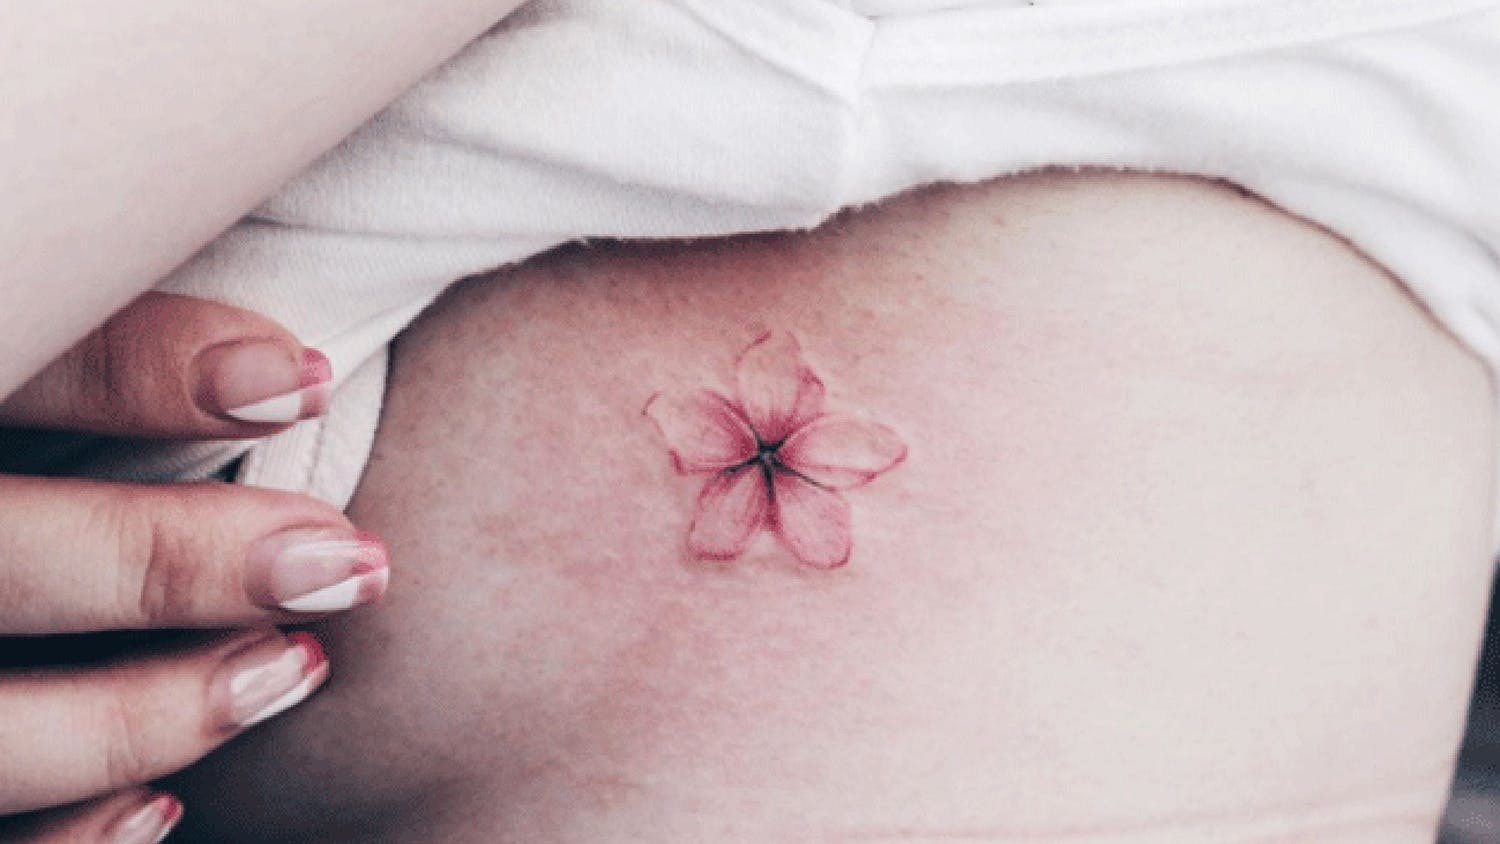 Emerging Trend Of Side Boob Tattoos That Women Are Loving - Netmums